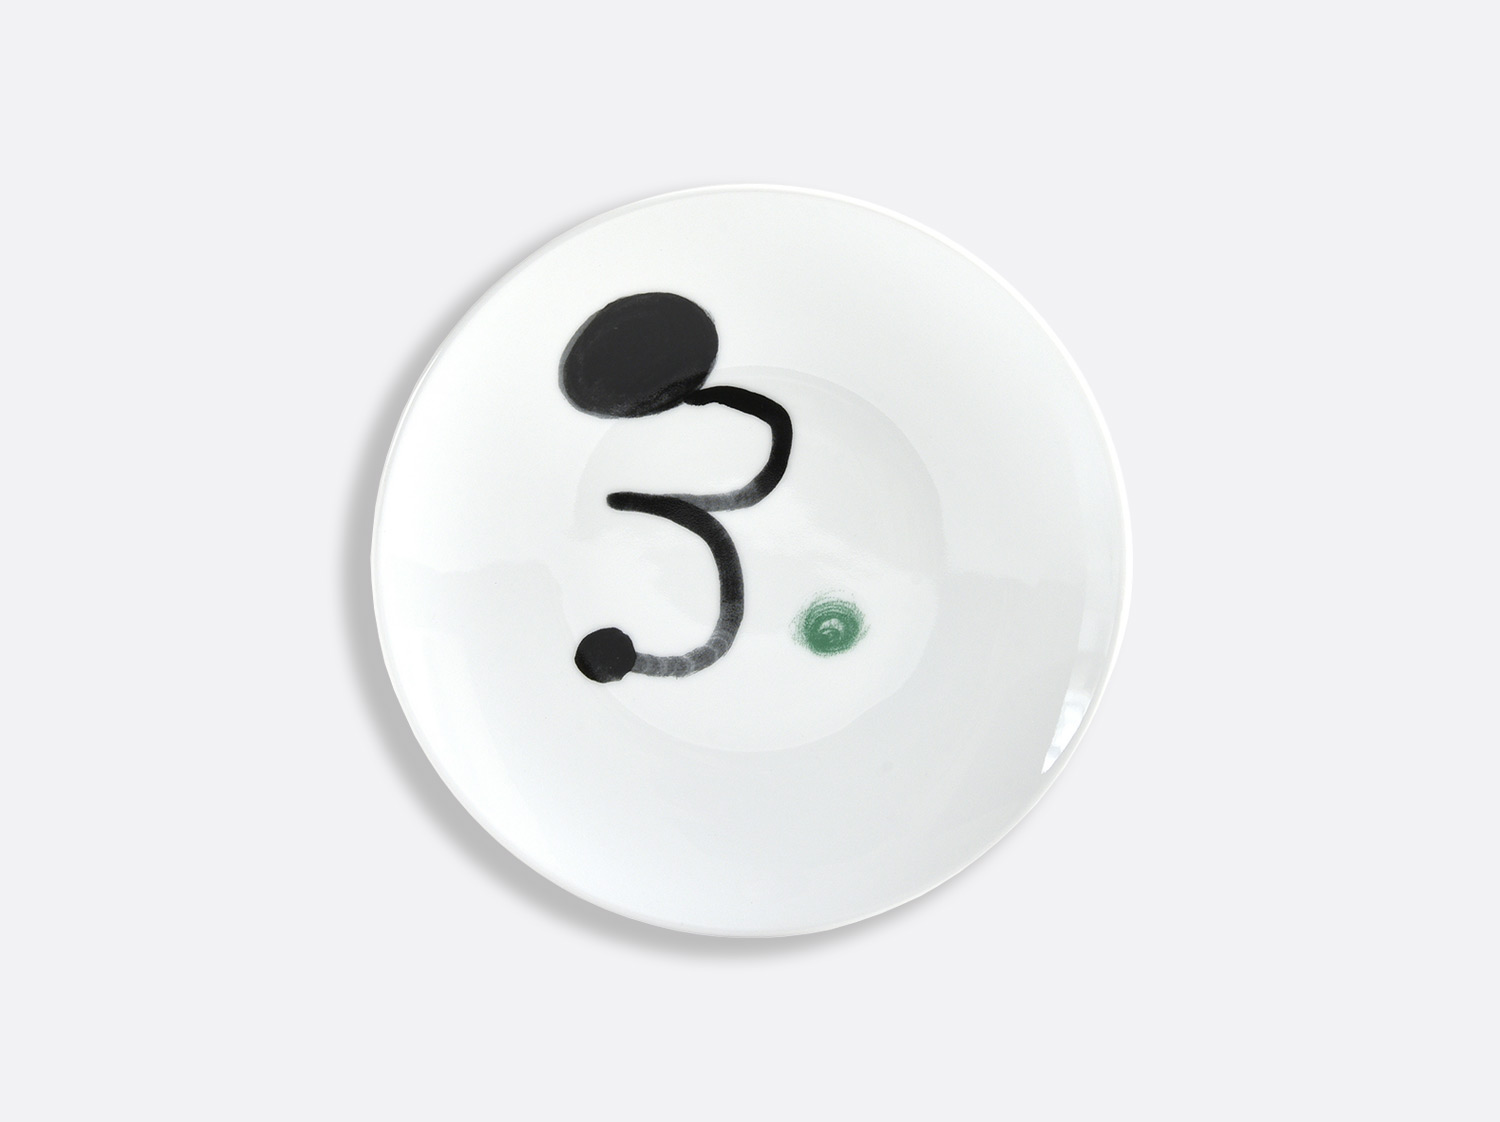 China 2 Bread and butter plates 6.5" Vert - Page 52 of the collection PARLER SEUL - Joan Miro | Bernardaud